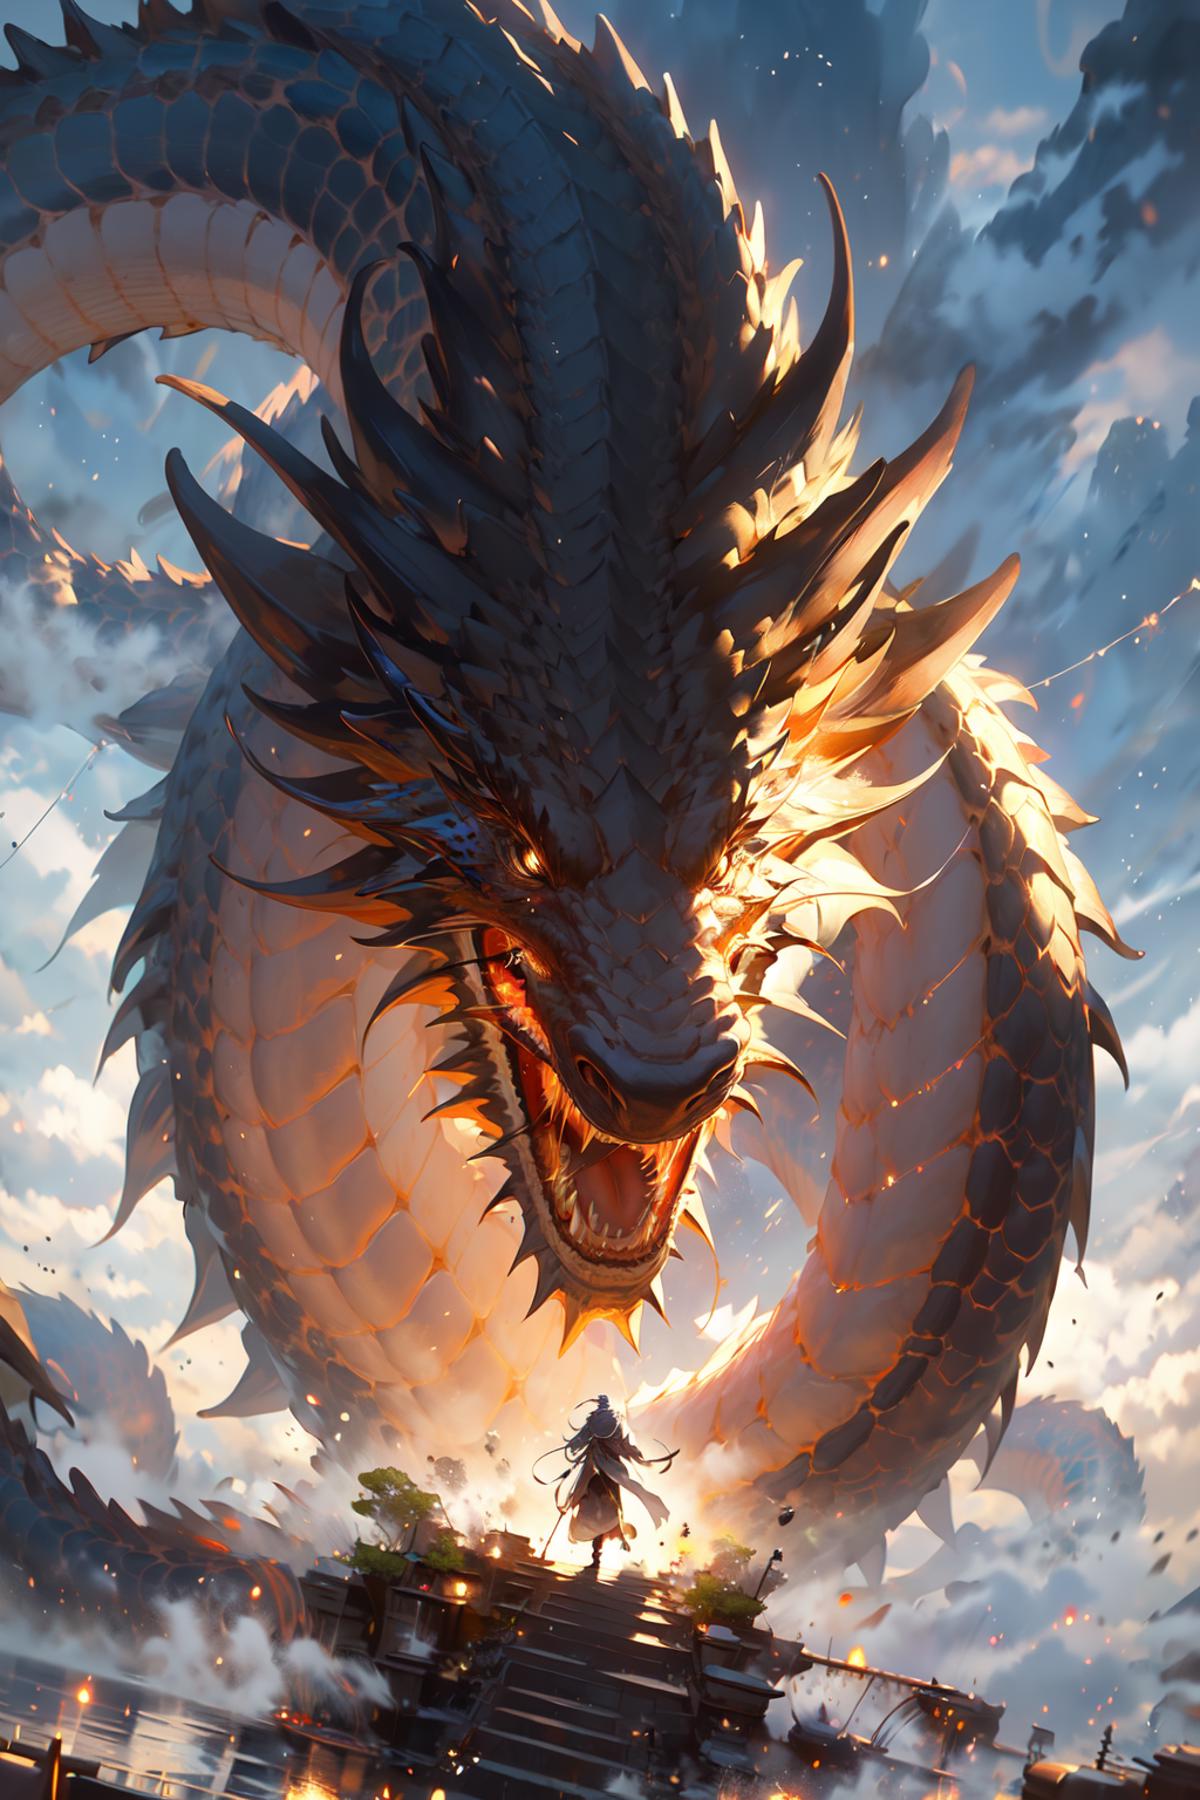 A dragon with a fierce look on its face.